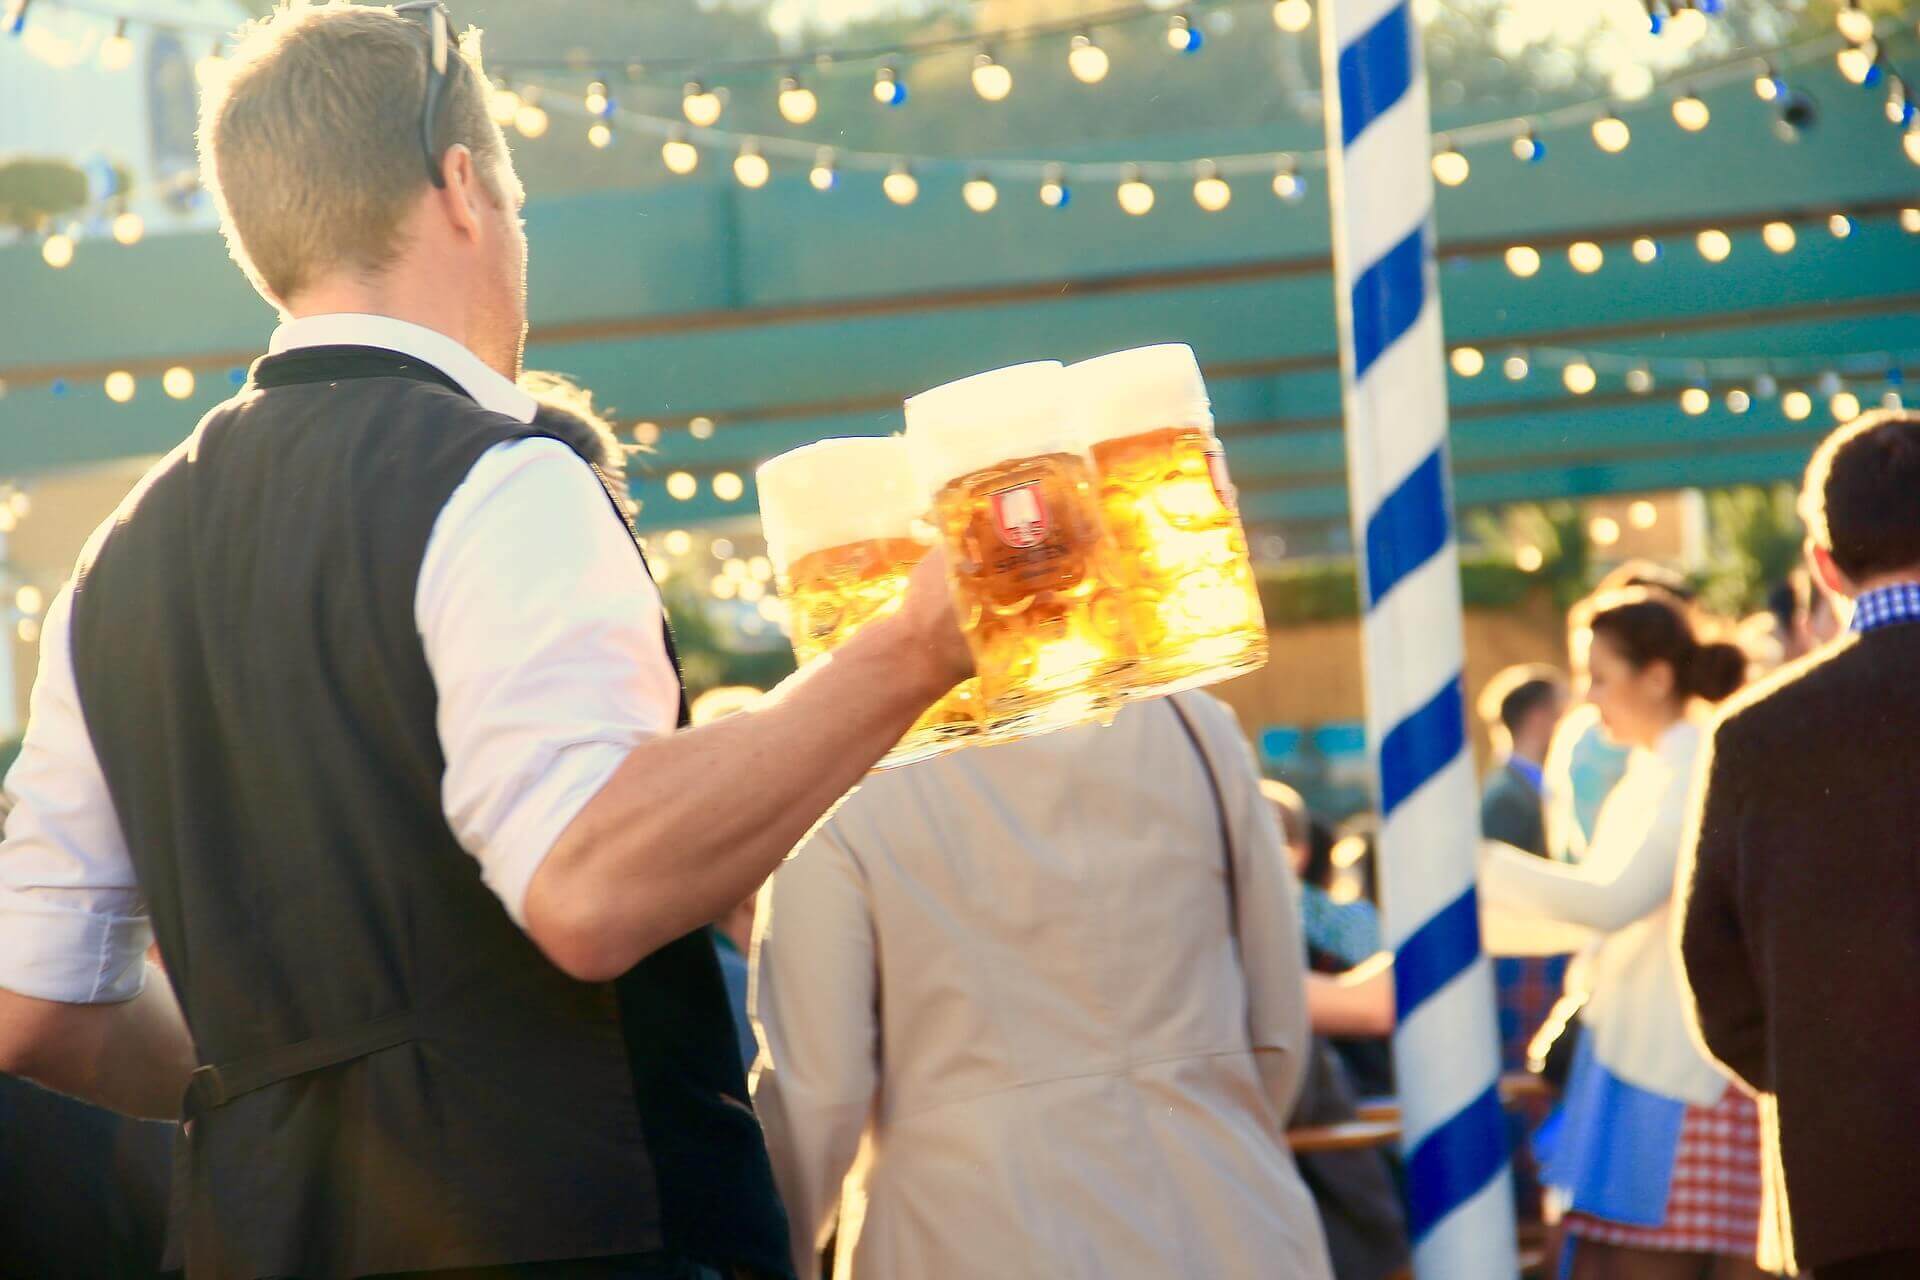 A waiter carrying at least three jugs of beer at a festival.